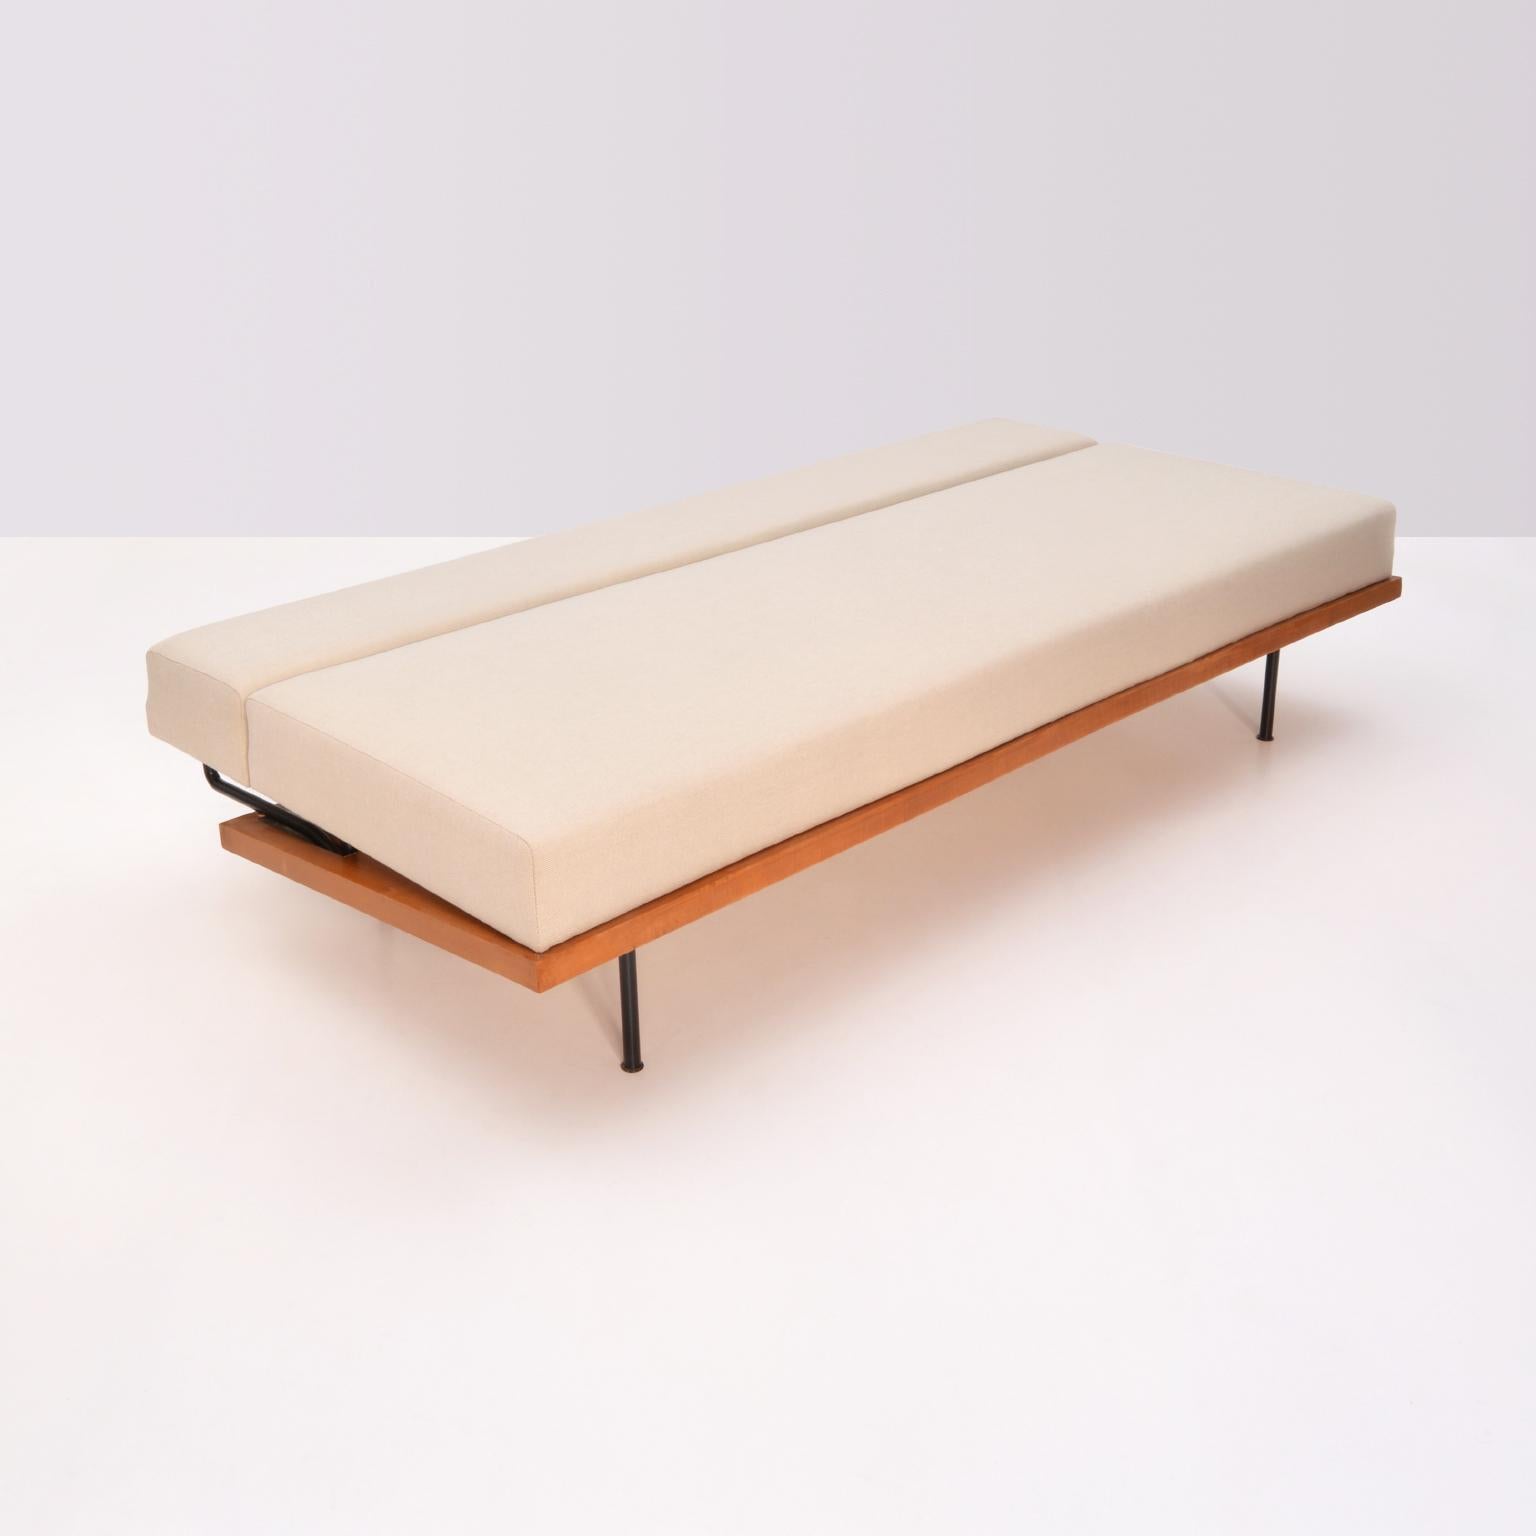 Mid-20th Century Minimalist Couch/Daybed by Florence Knoll, Wooden Frame, Reupholstered, ca. 1960